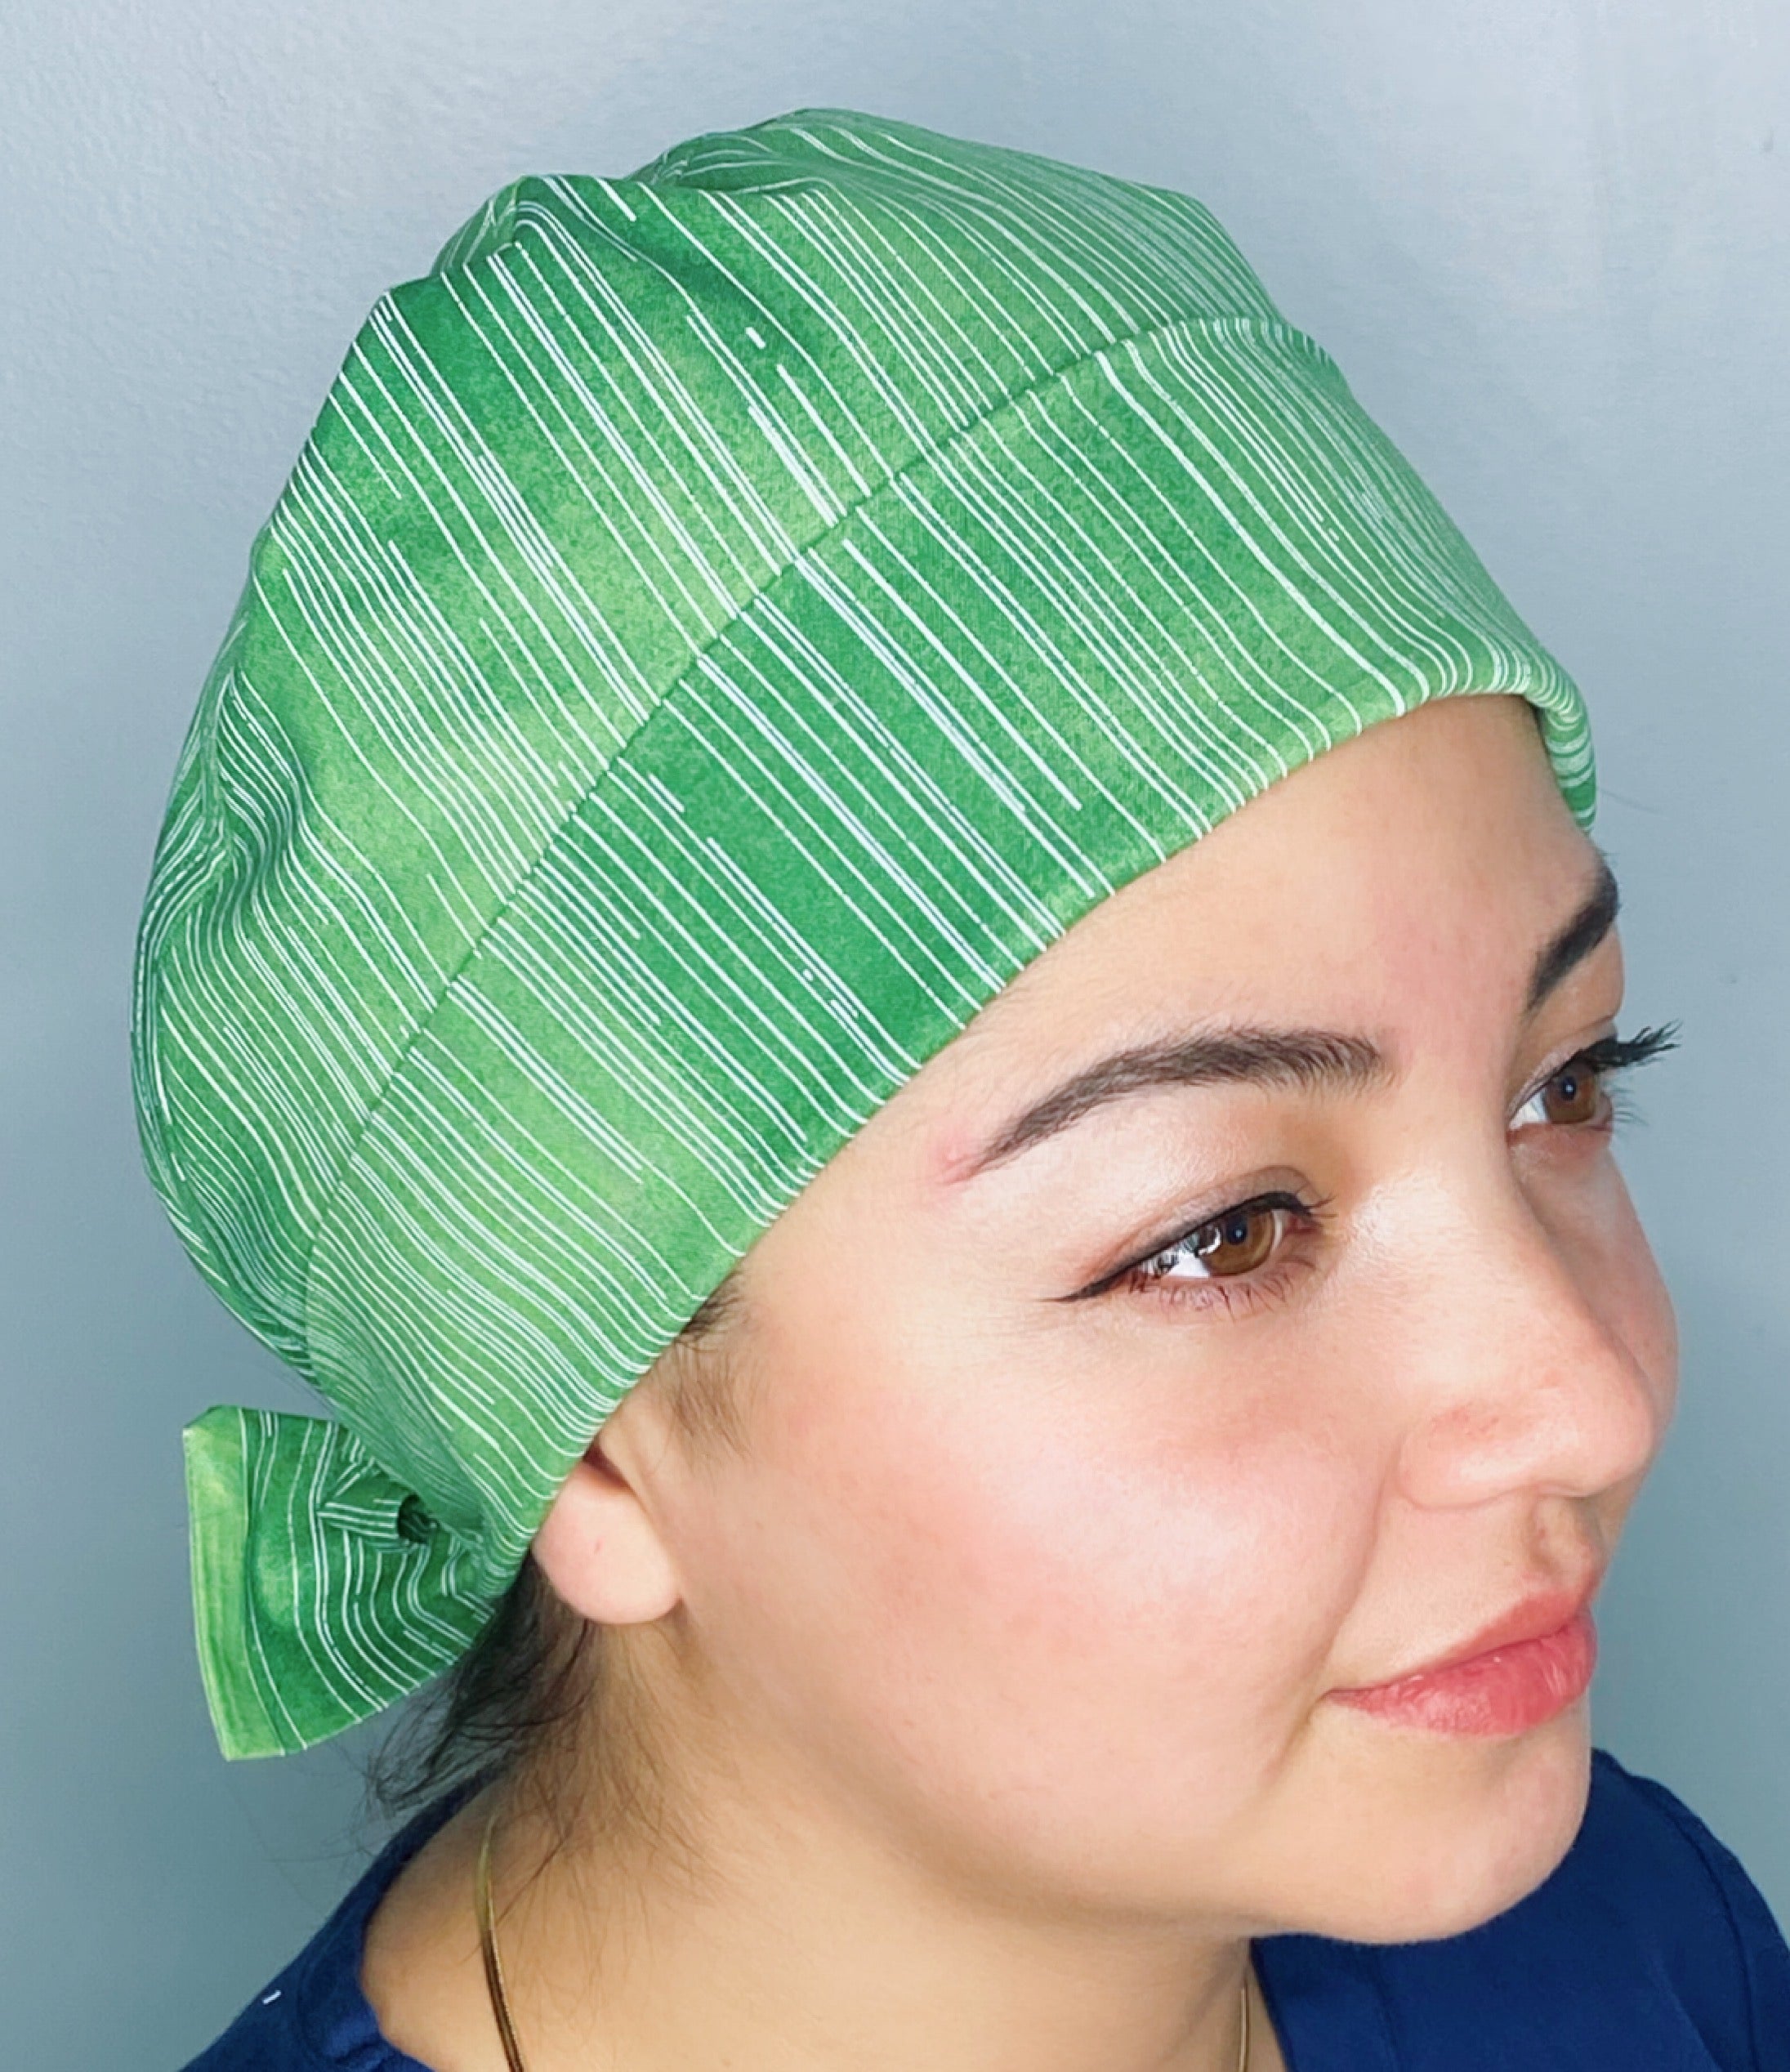 White Thin Stripes on Green Pattern Fancy Themed Pixie